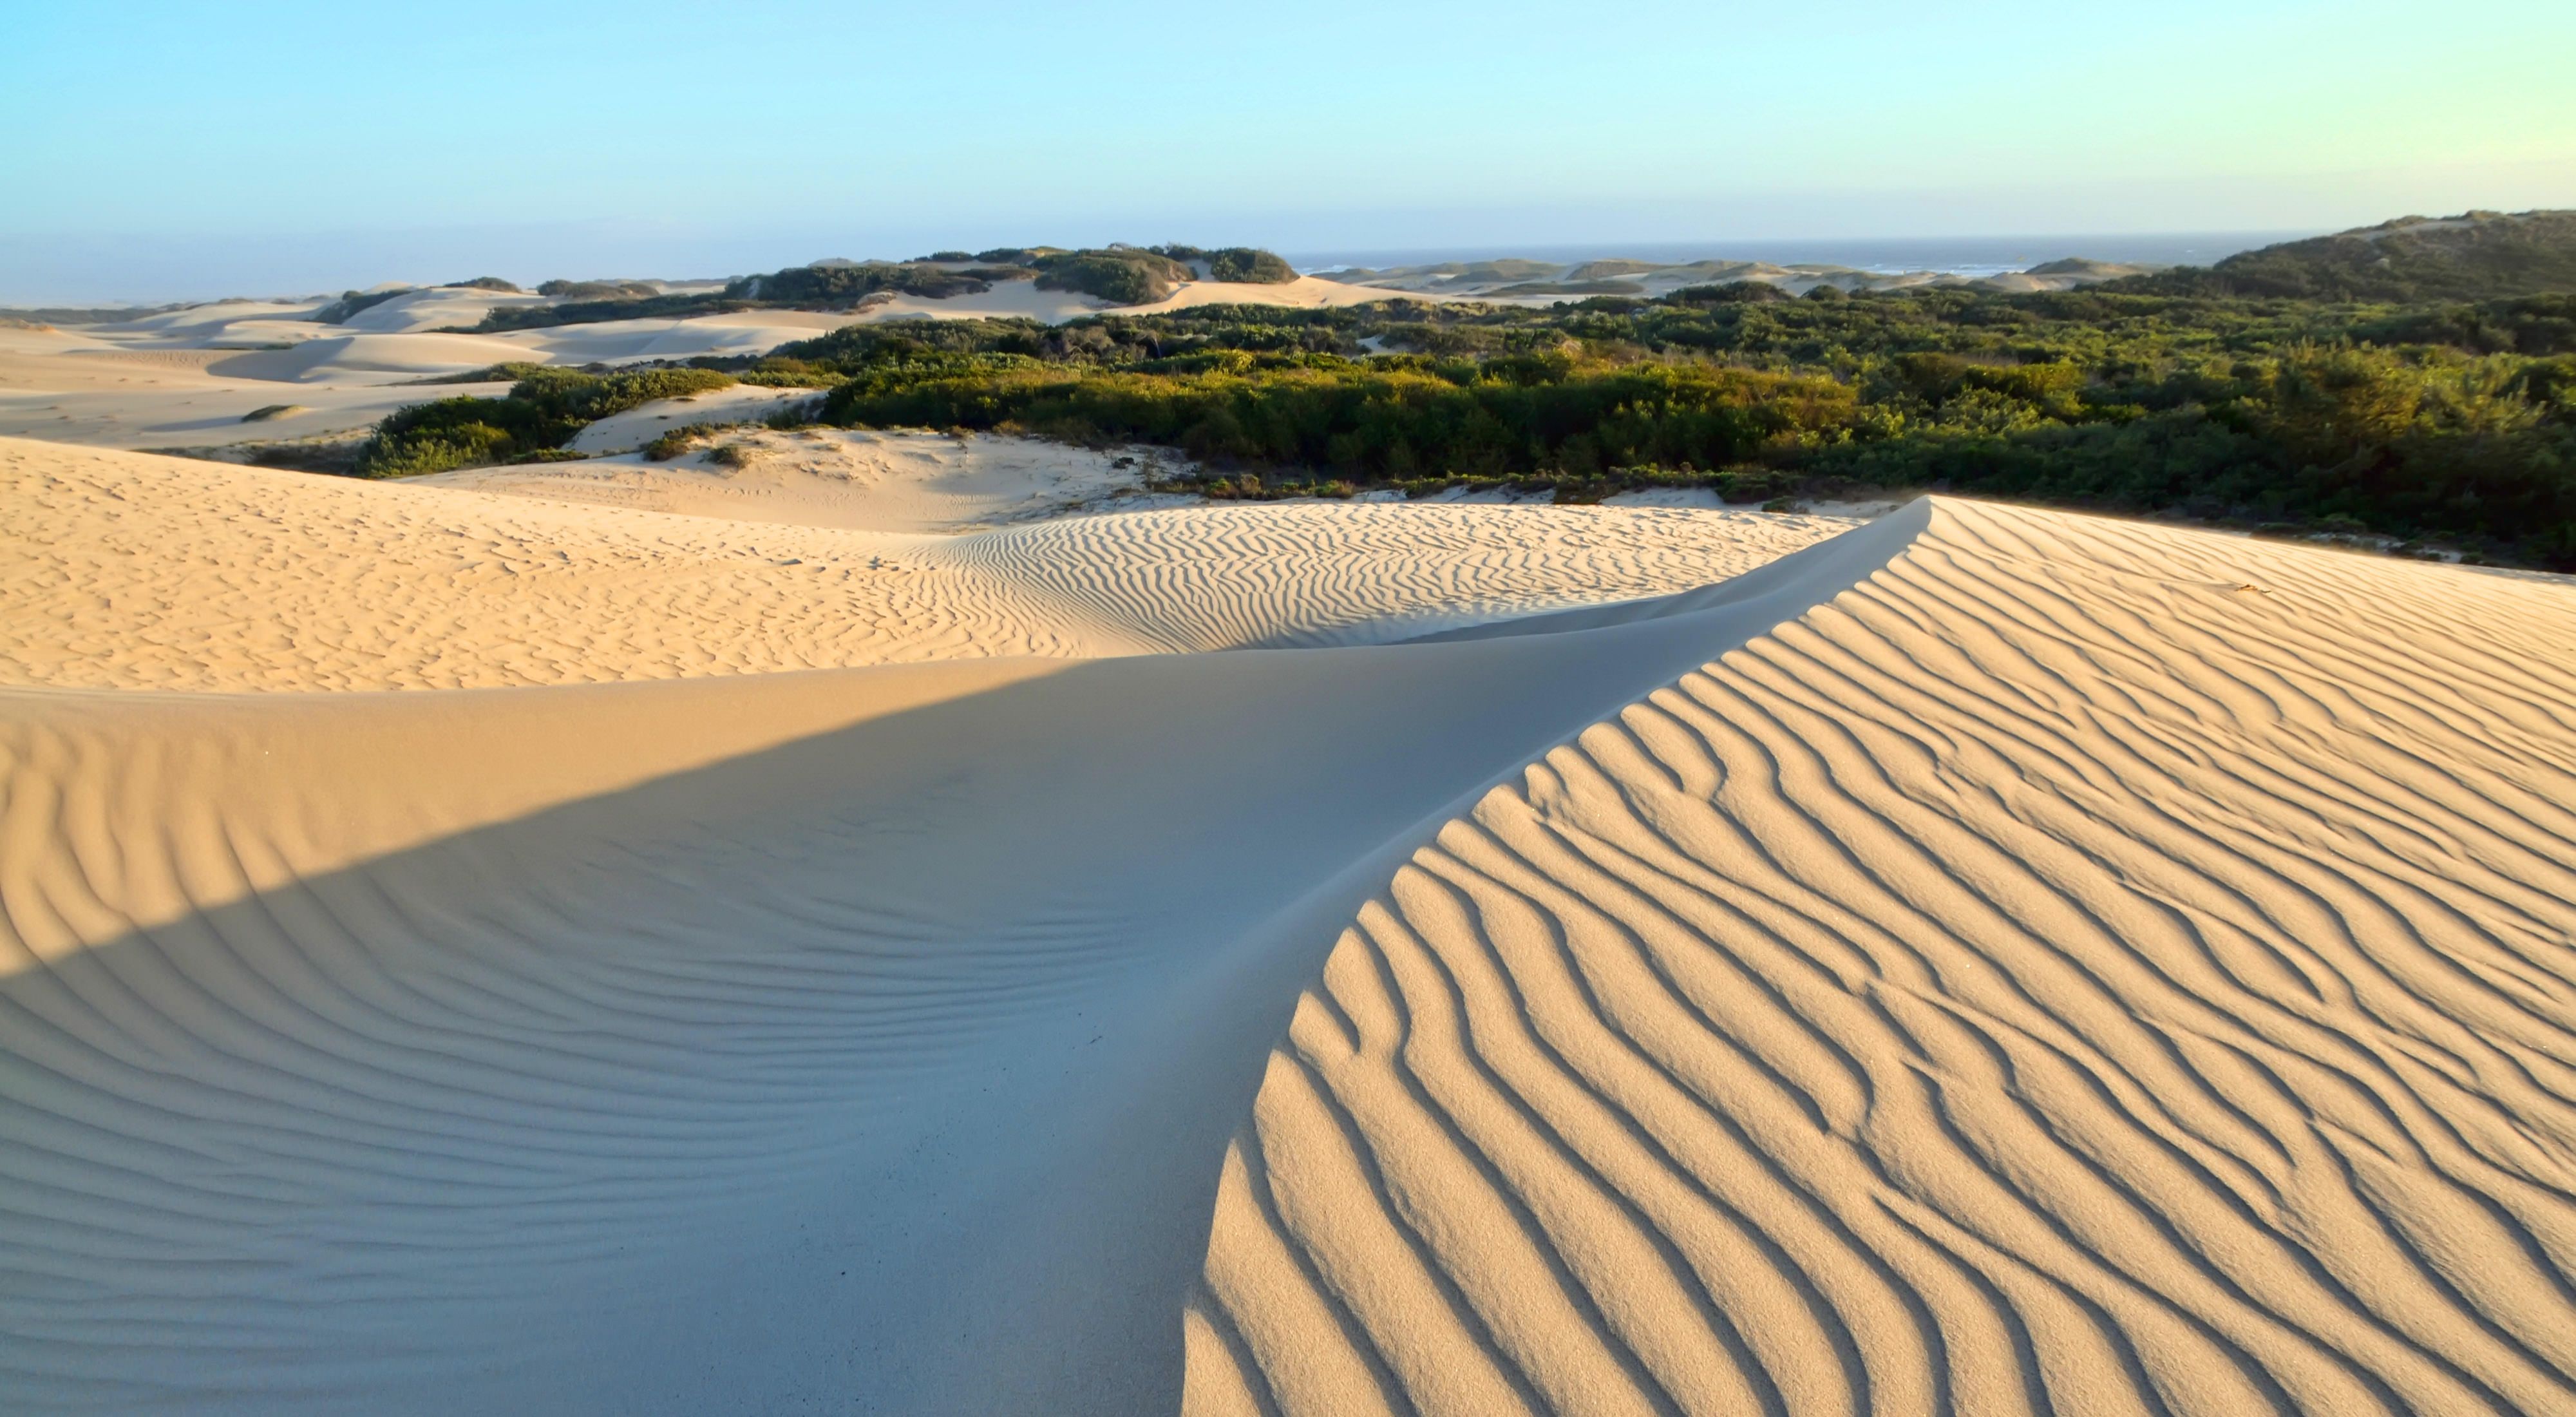 Guadalupe-Nipomo Dunes on the central coast of California